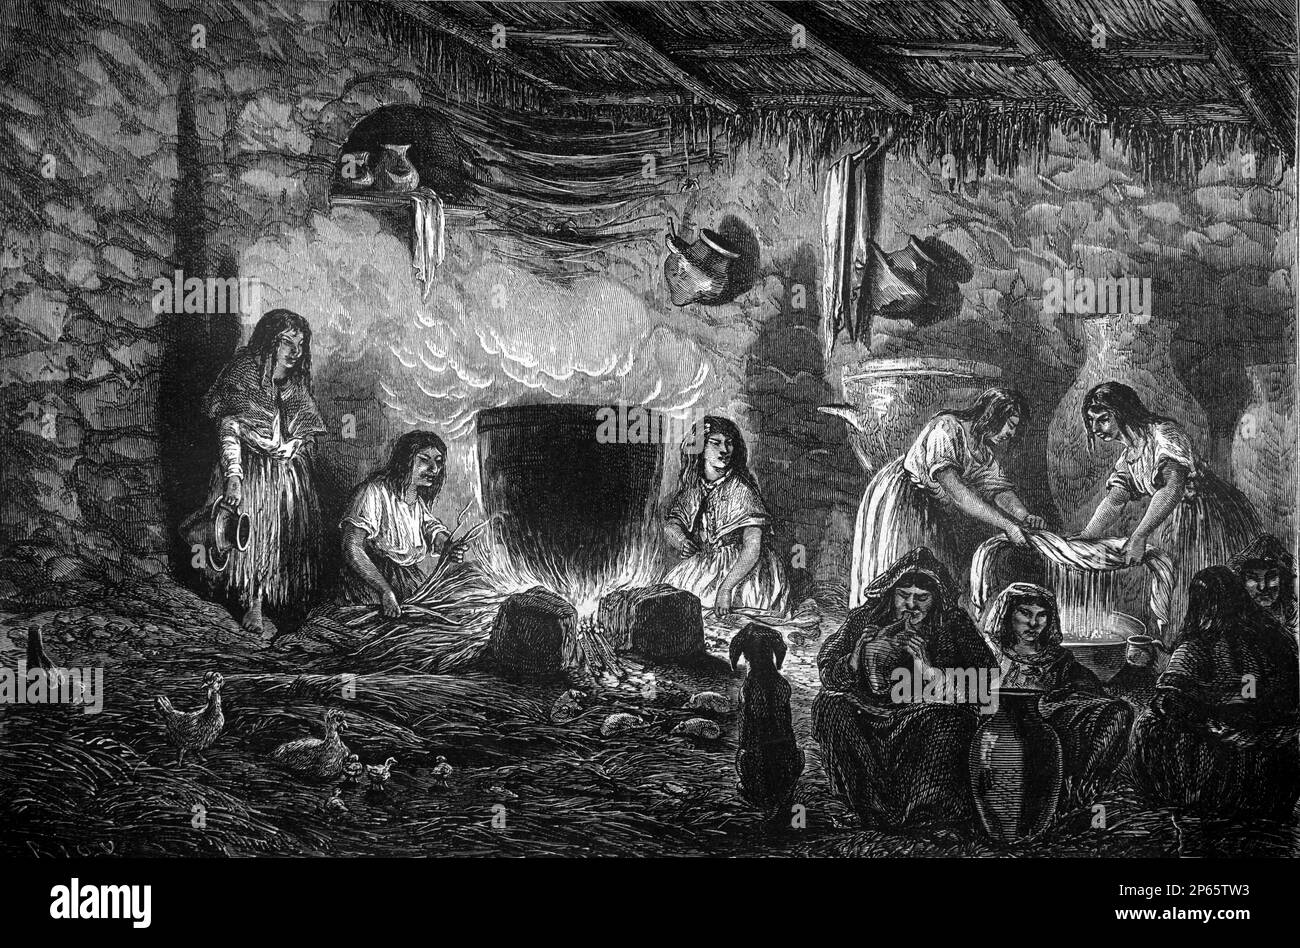 Distillery & Consumption of Chicha, a fermented alcoholic drink, corn beer or non-fermented beverage,  among the Quechua or Quichua People of South America. Vintage Engraving or Illustration 1862 Stock Photo